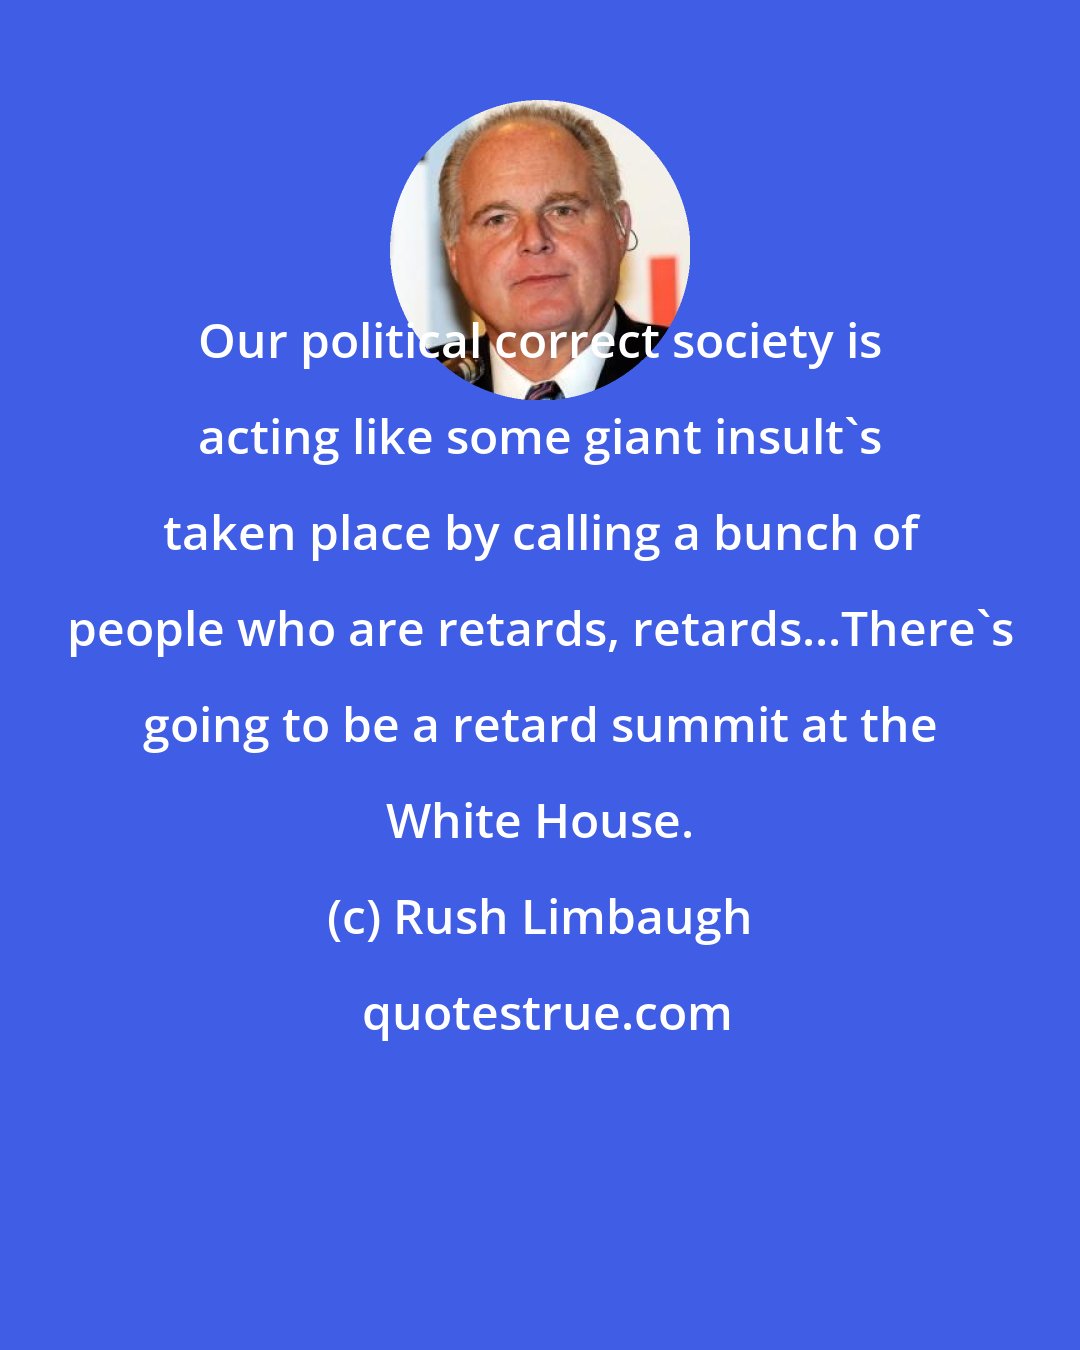 Rush Limbaugh: Our political correct society is acting like some giant insult's taken place by calling a bunch of people who are retards, retards...There's going to be a retard summit at the White House.